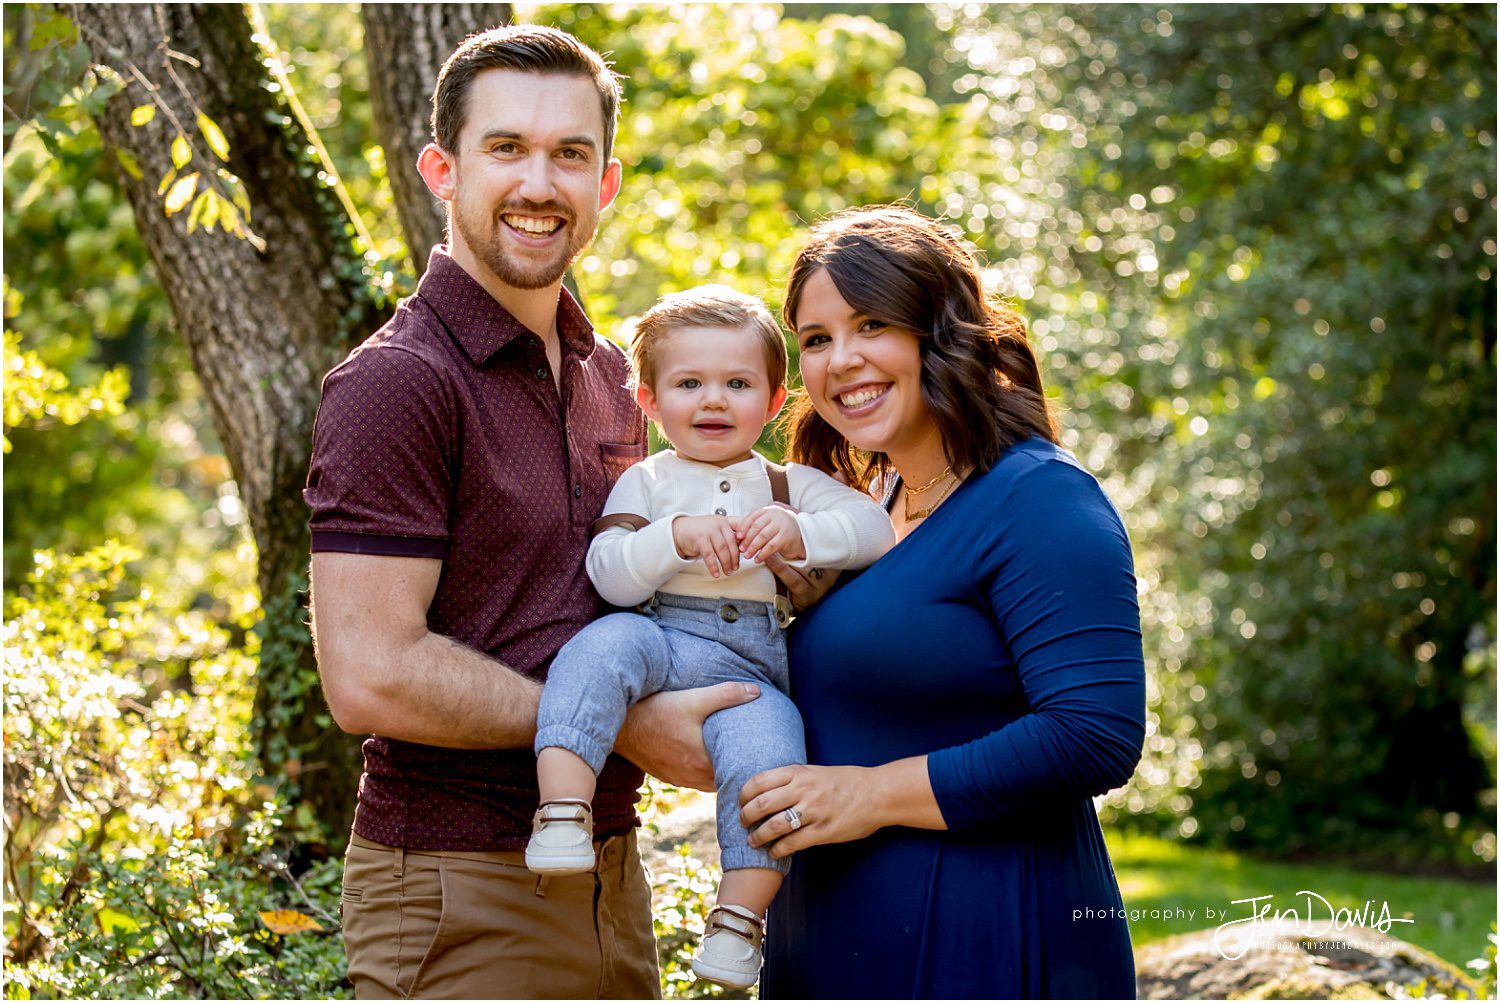 One Year Old Portraits Lawrenceville NJ Family Photographer